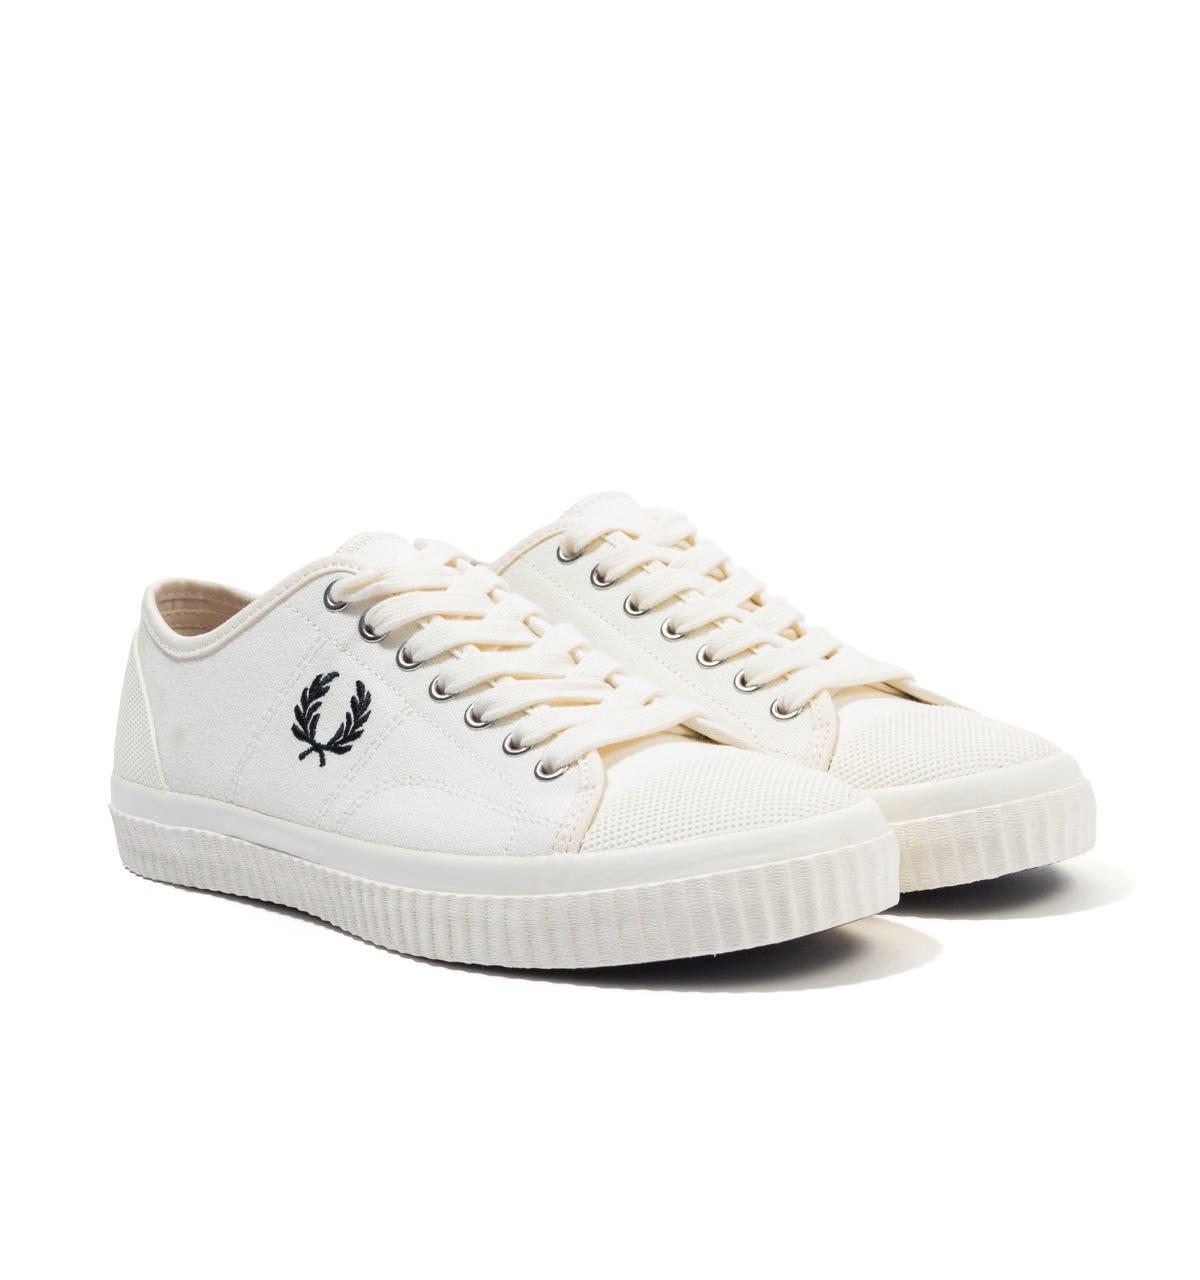 Fred Perry Hughes Low Canvas Trainers in Beige (Natural) for Men - Save 32%  | Lyst